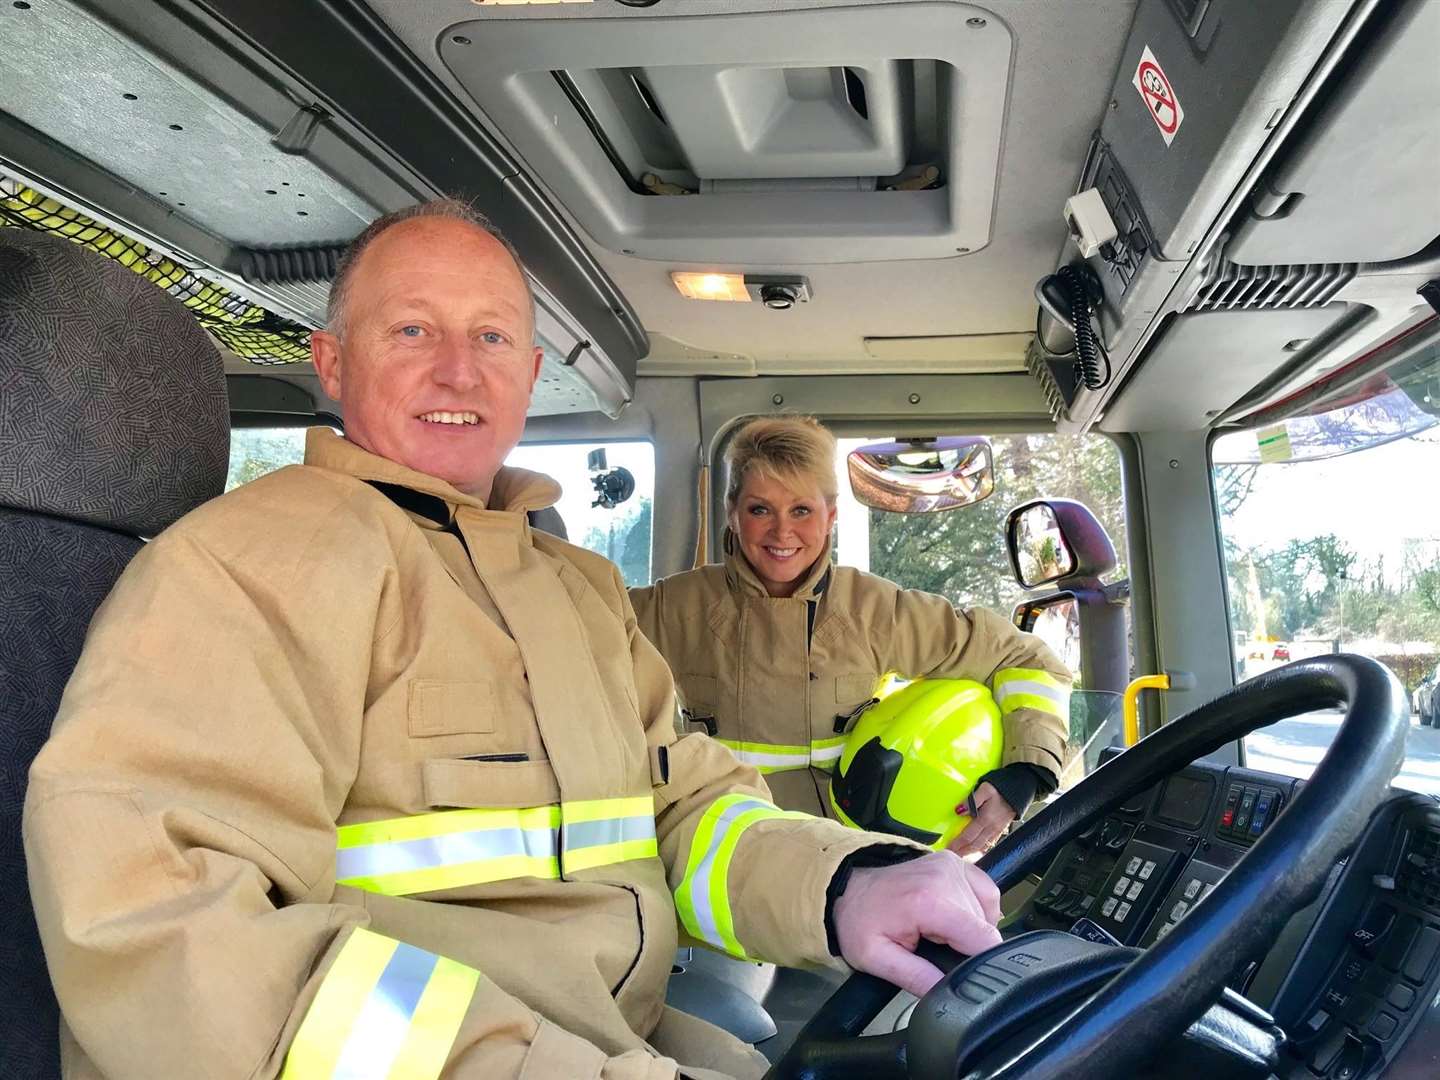 Senior Driving Instructor Dave Gunn, who drove the fire engine during the filming, with Cheryl Baker